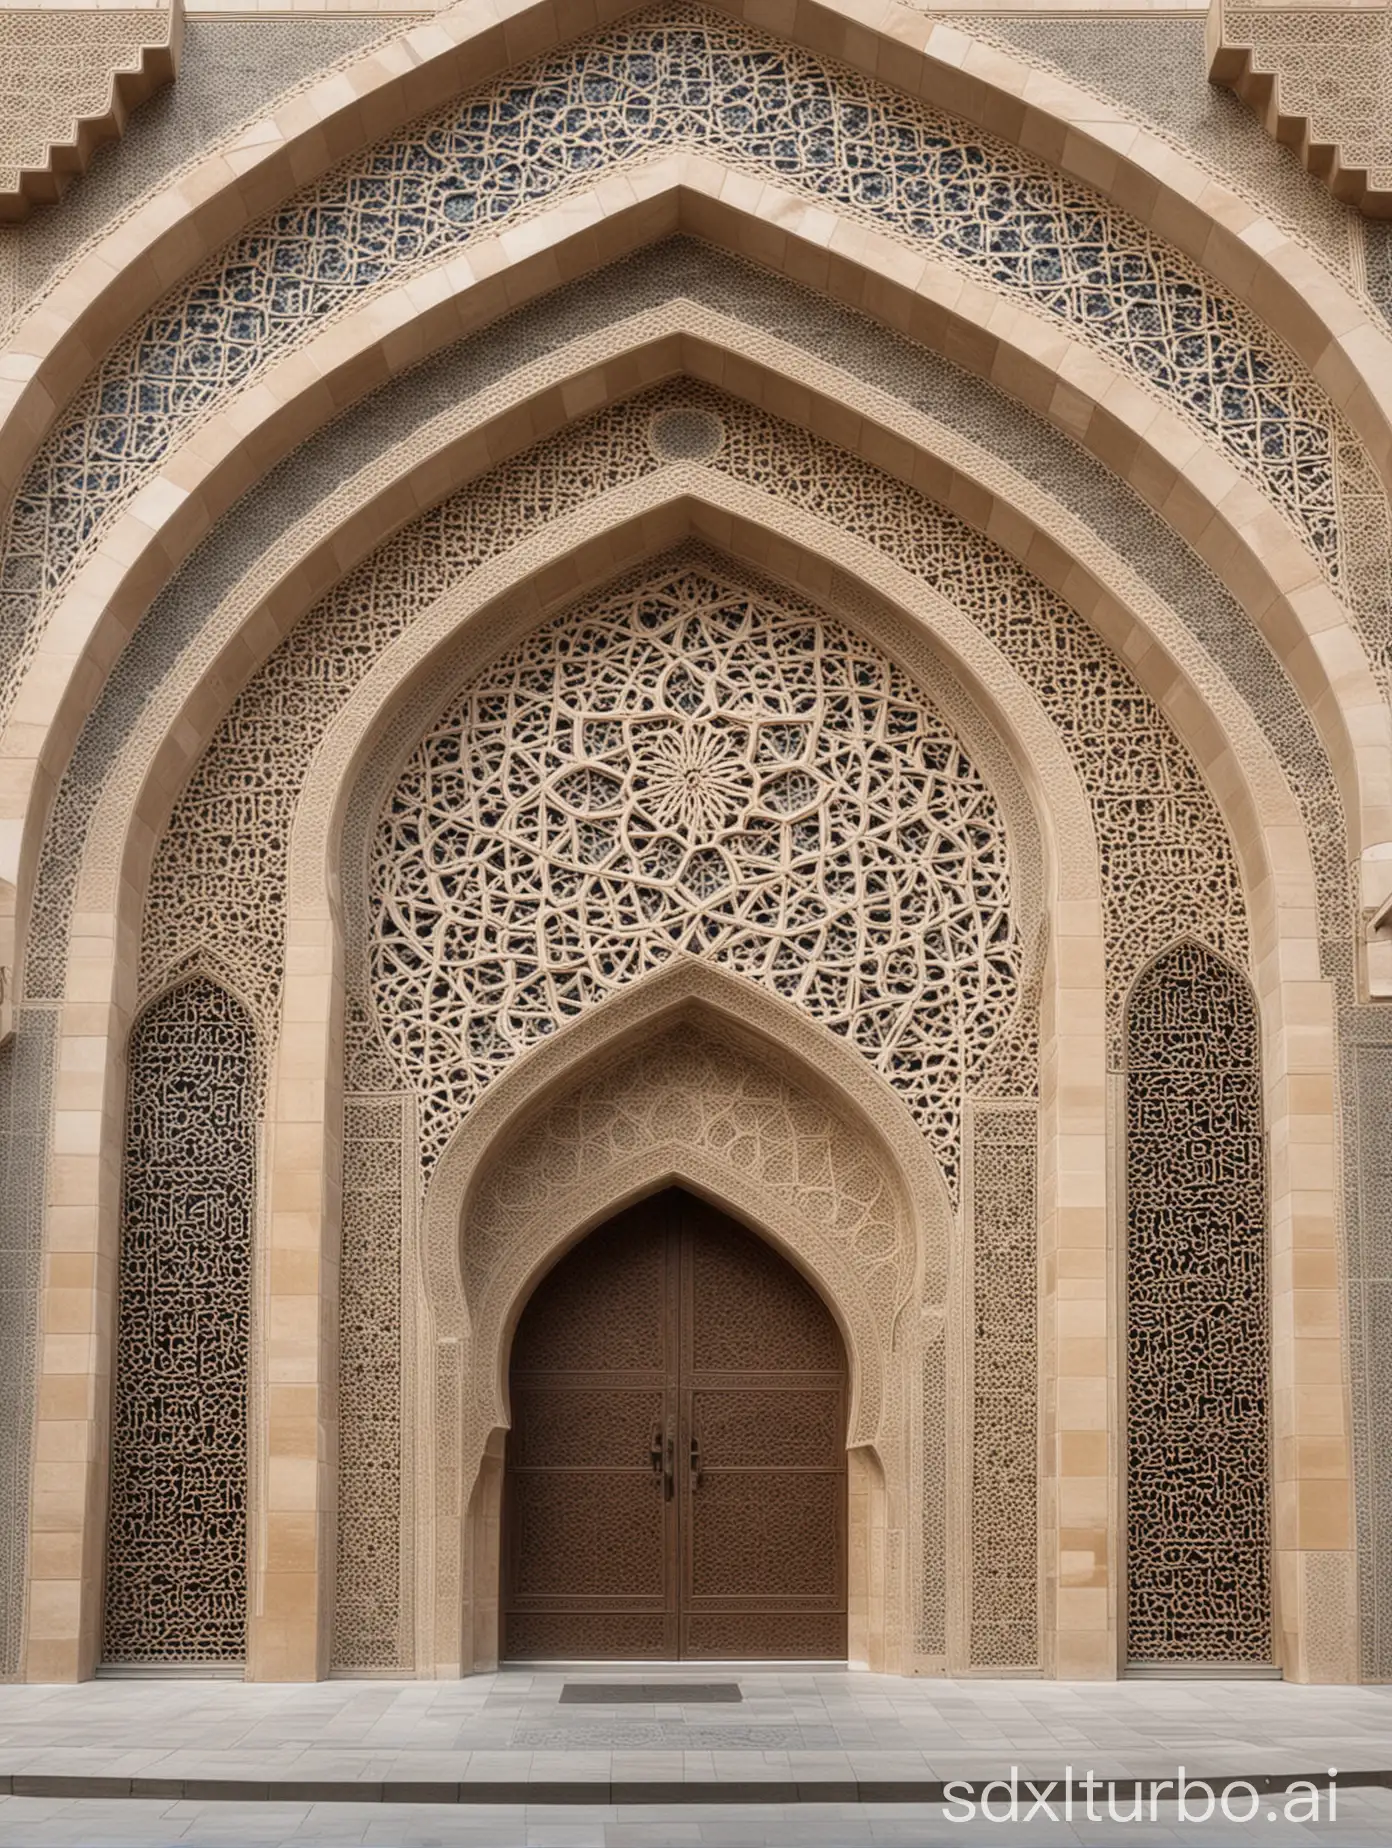 The facade of a modern building with Islamic designs